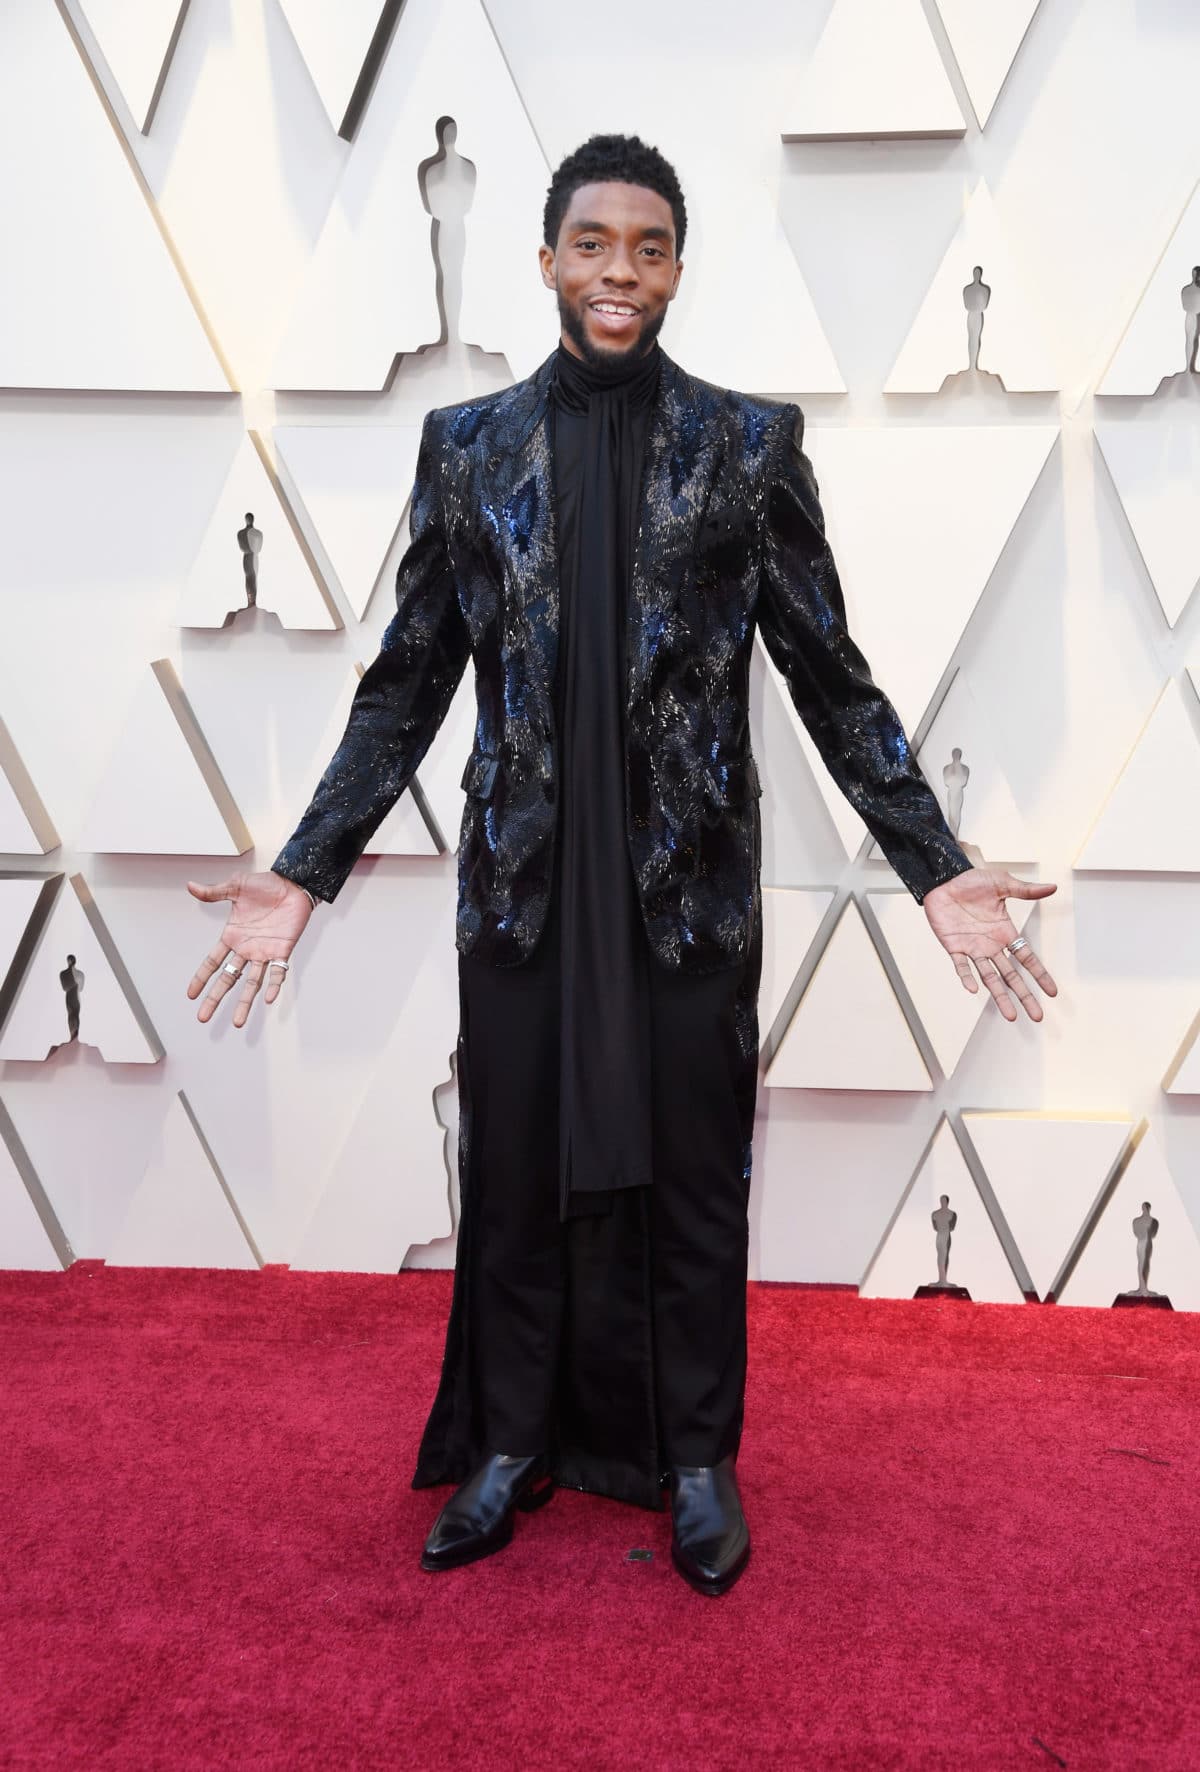 The Oscars 2019 BestDressed Men Were Suited, Booted & Did Not Come To